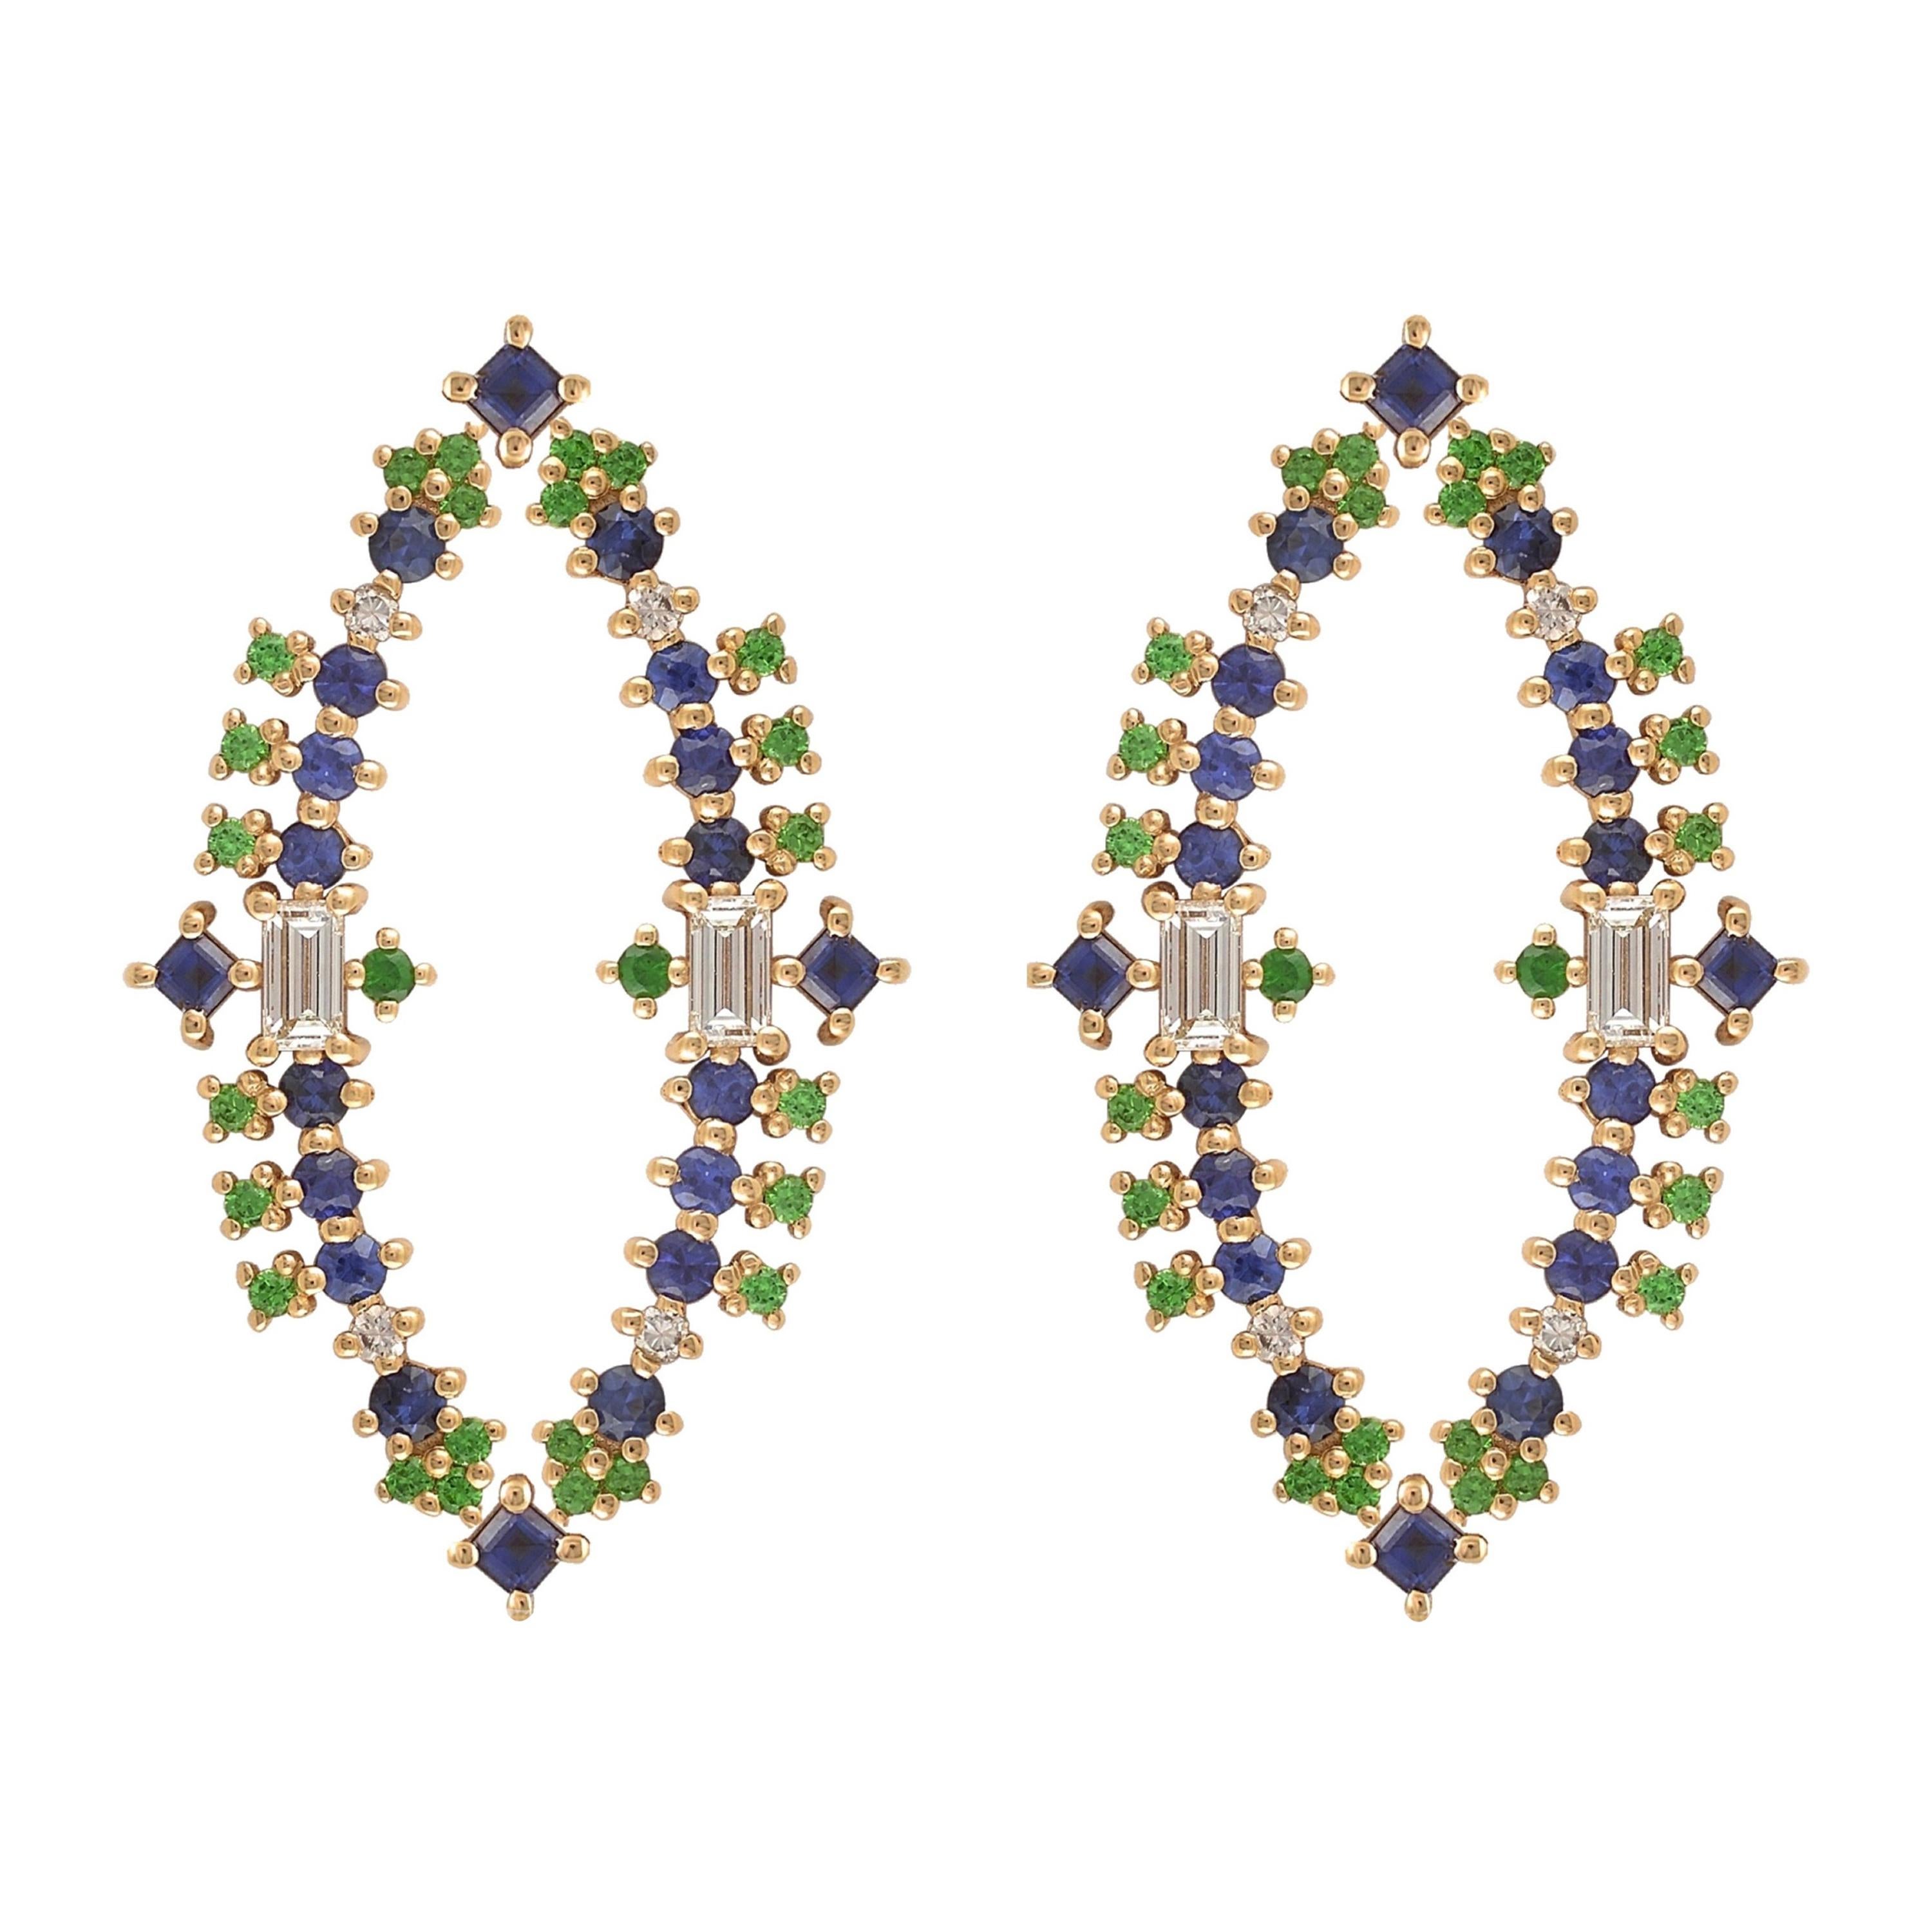 Colorful Earrings in 18k Gold with Sapphires, Tsavorites and Diamonds